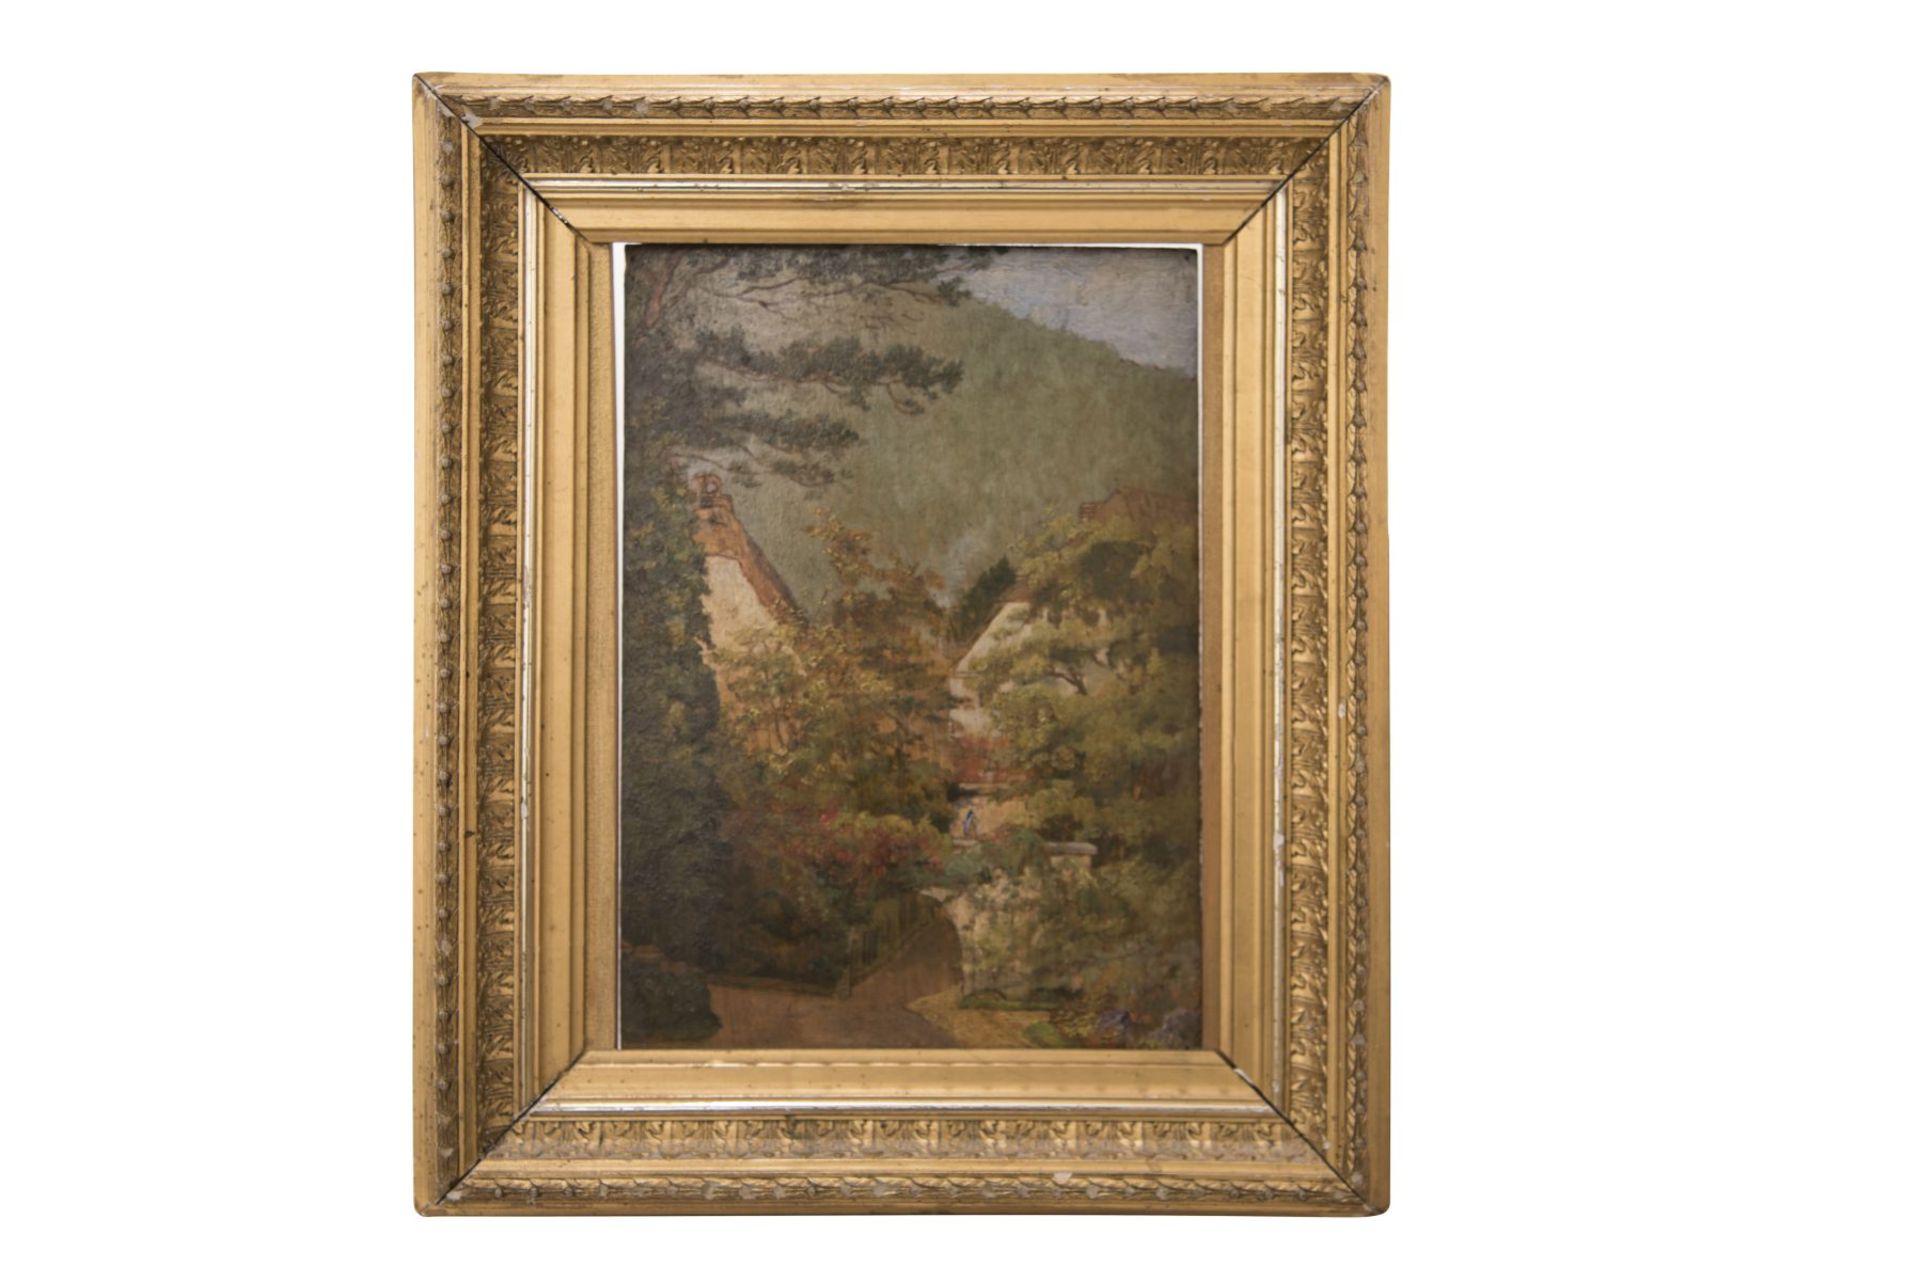 Impressionistic view of two houses by a river, late 19th century